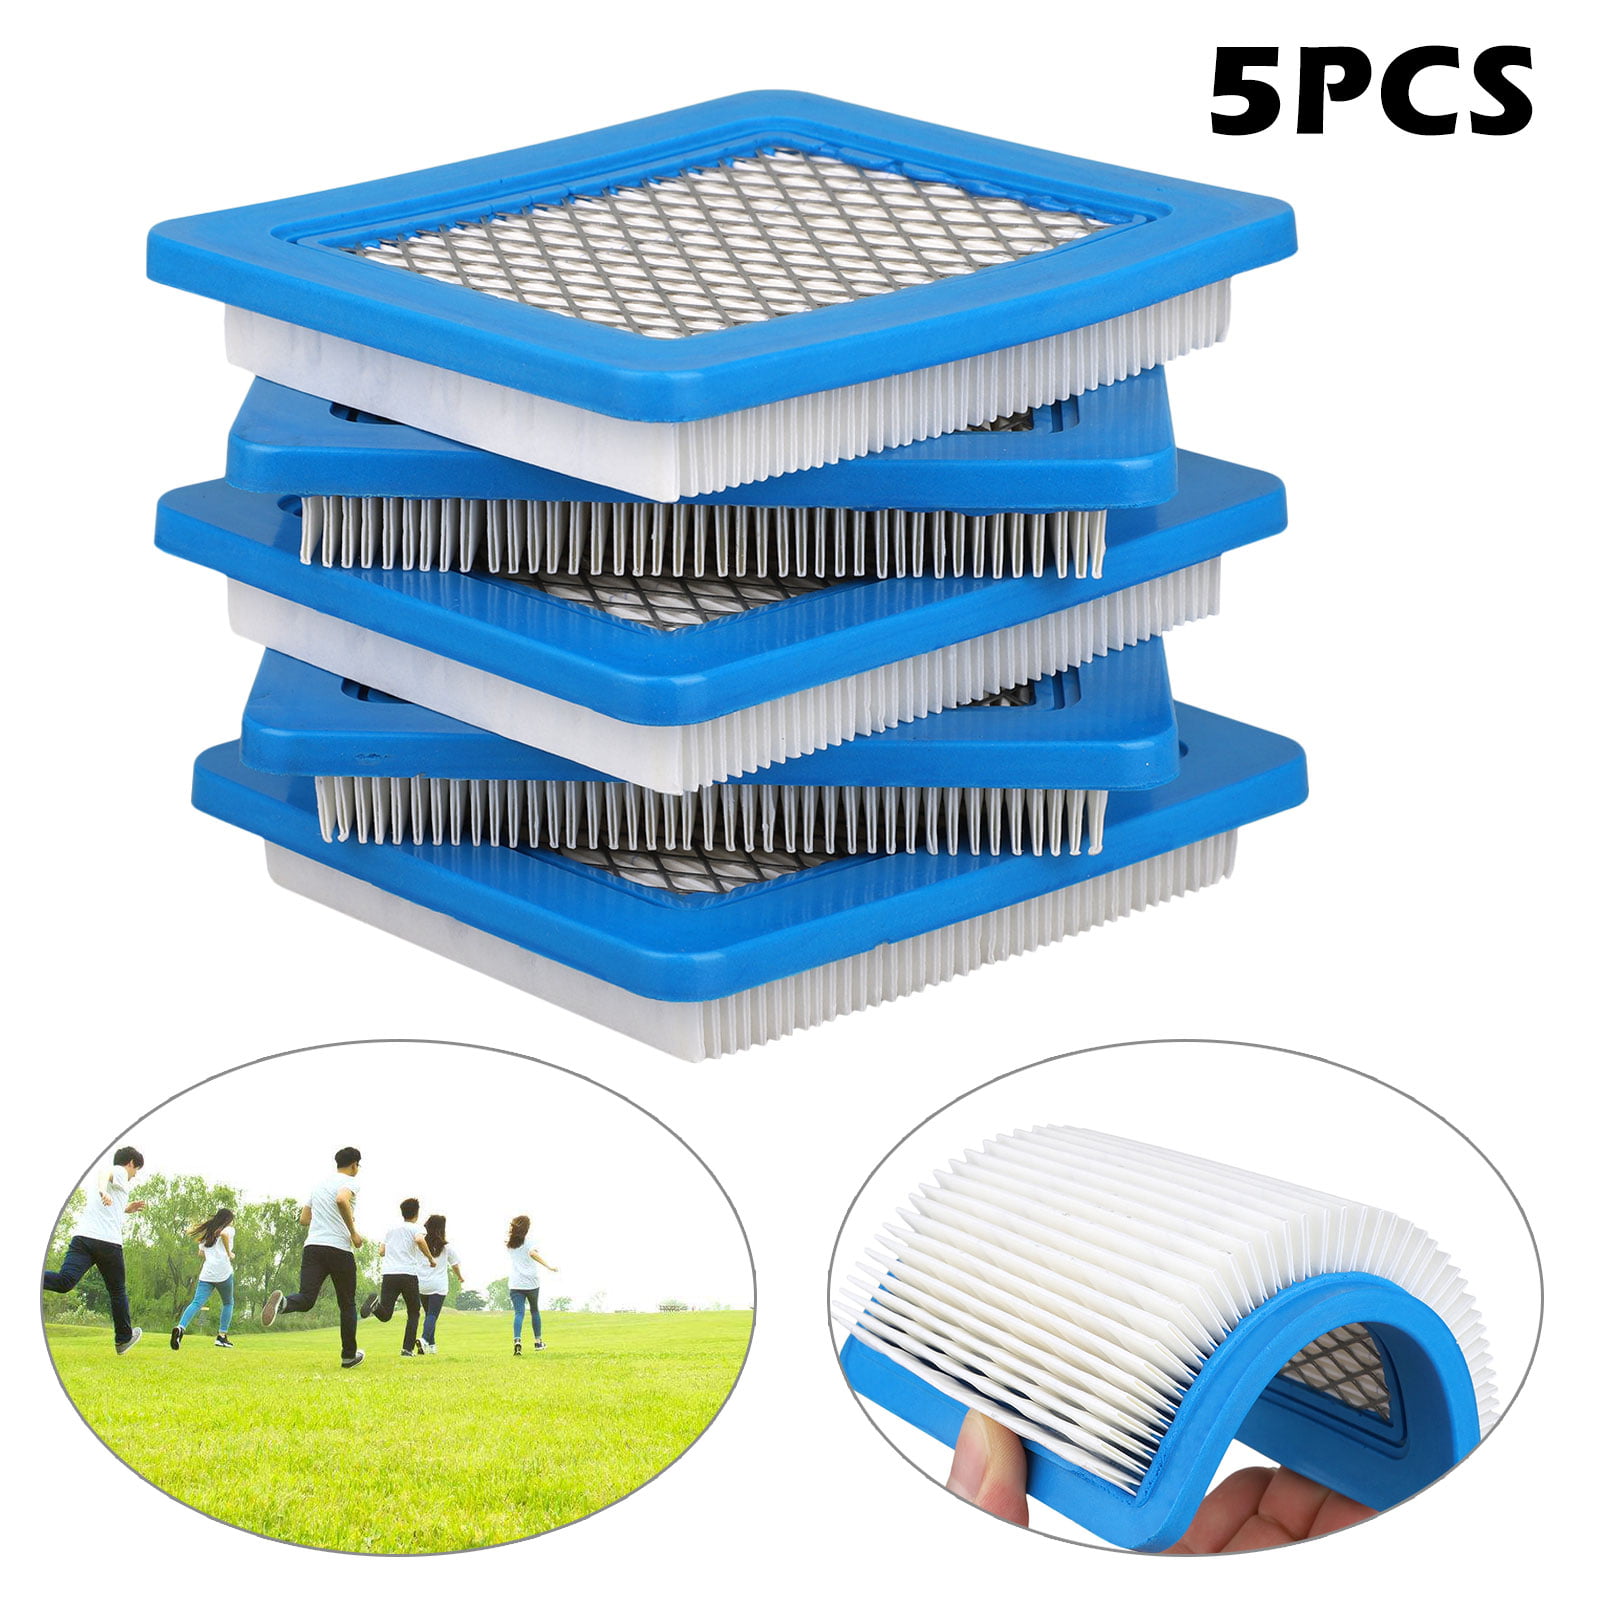 5Pcs Air Filter Lawn Mower Fit for 491588 491588S 399959 